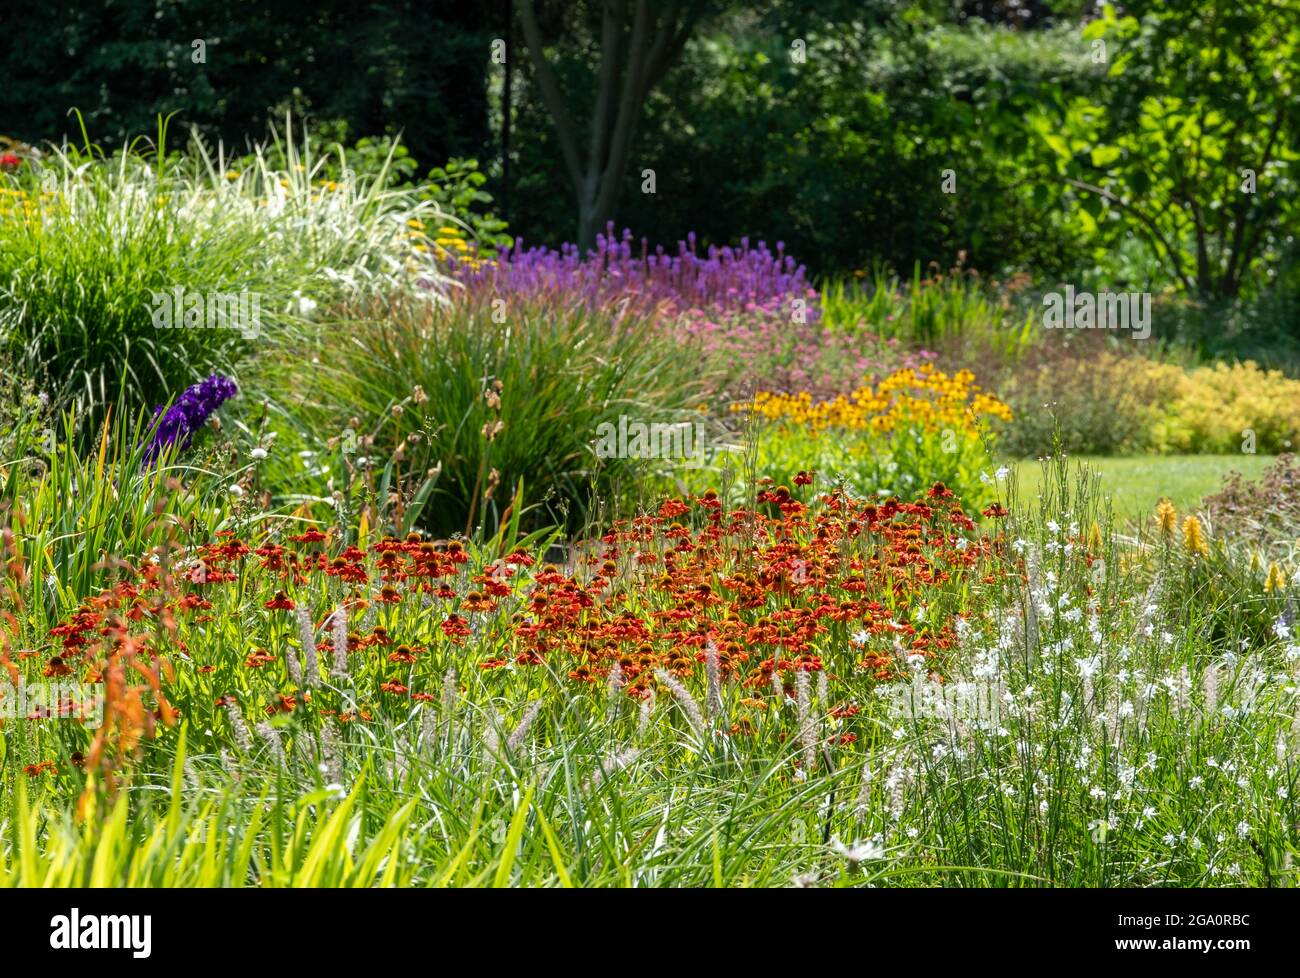 Bressingham Gardens near Diss in Norfolk. Colourful garden planted in naturalistic style with drifts of colour, layers and textures. Stock Photo